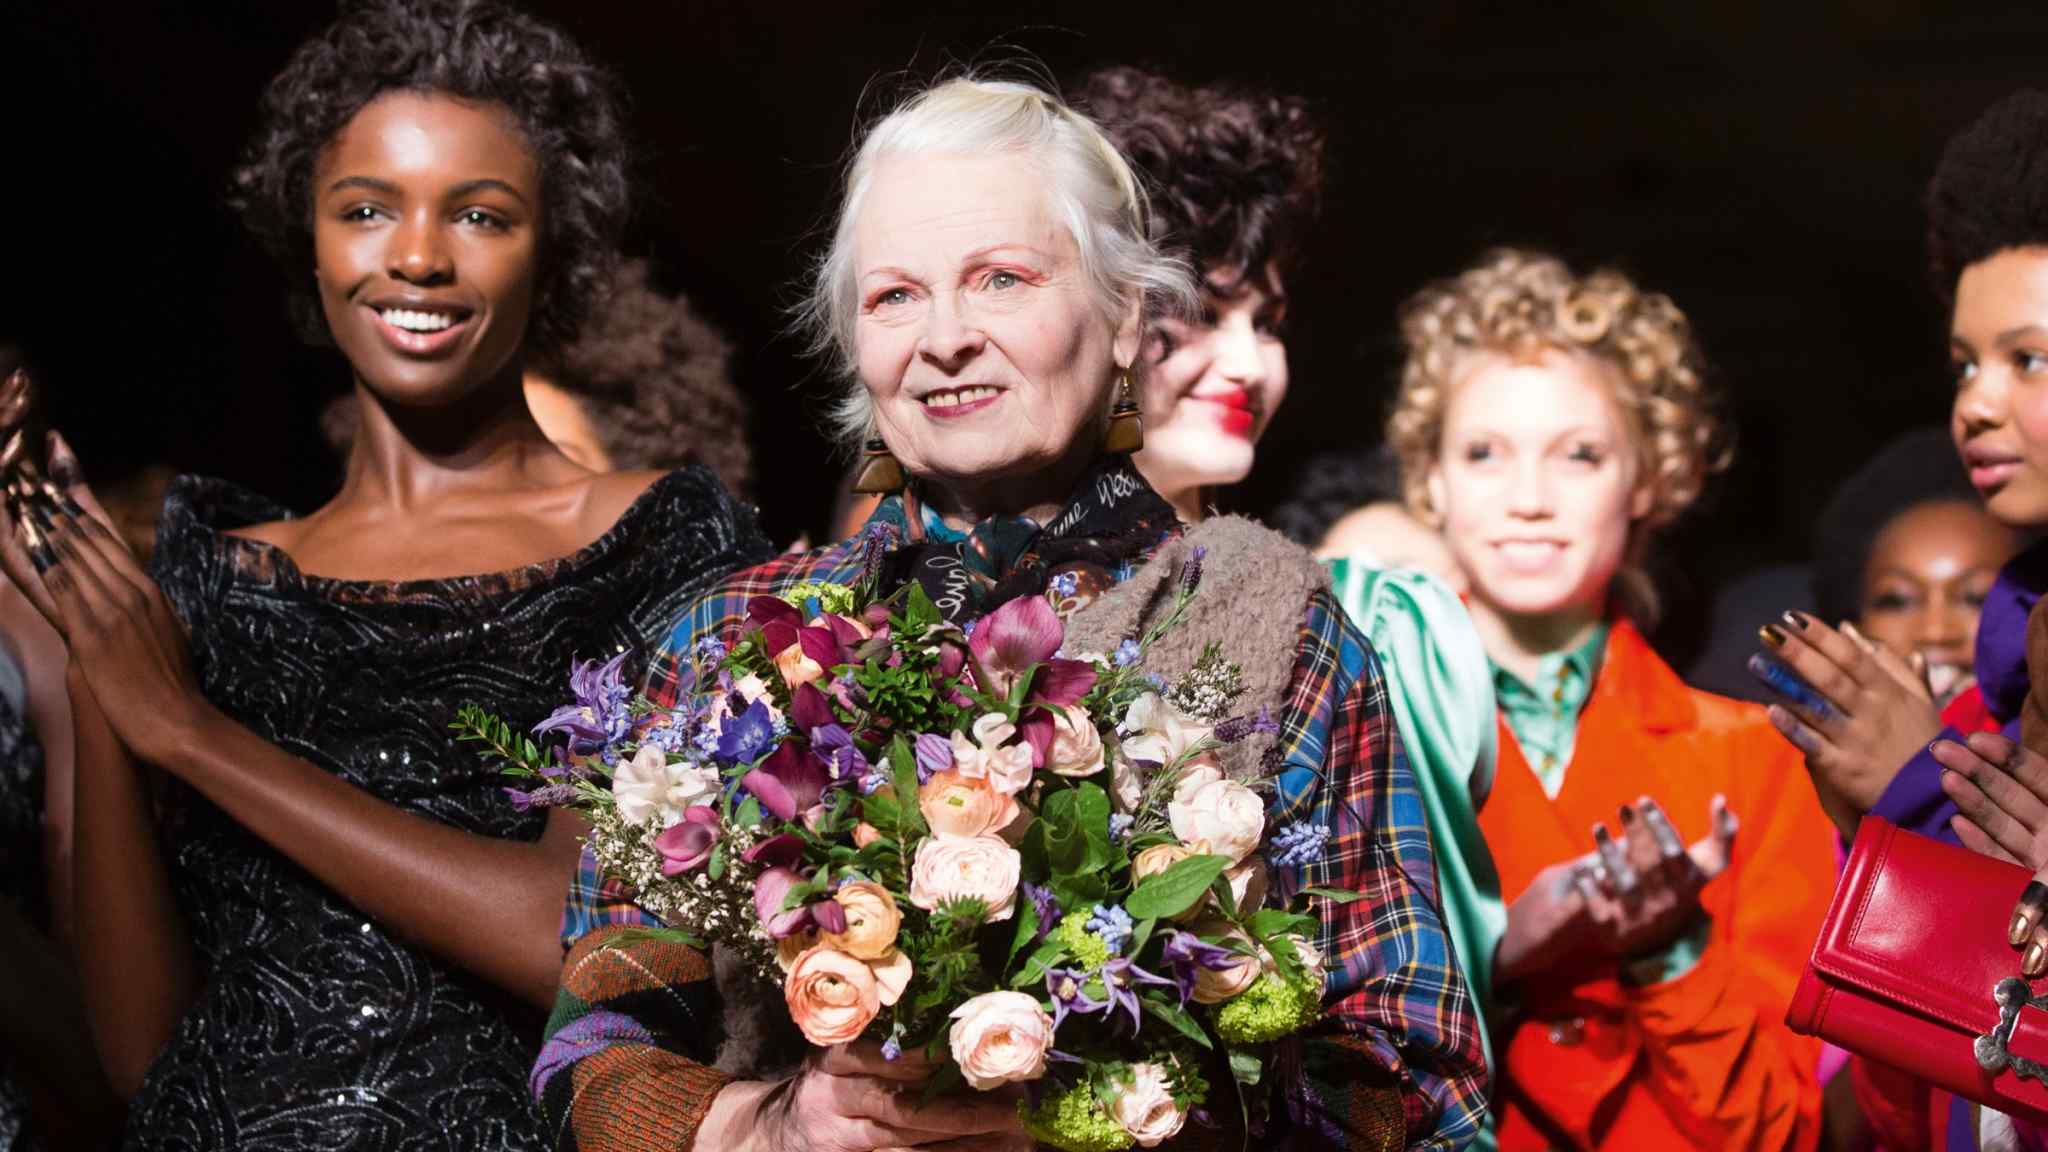 Rebel with a cause – the collectable legacy of Vivienne Westwood